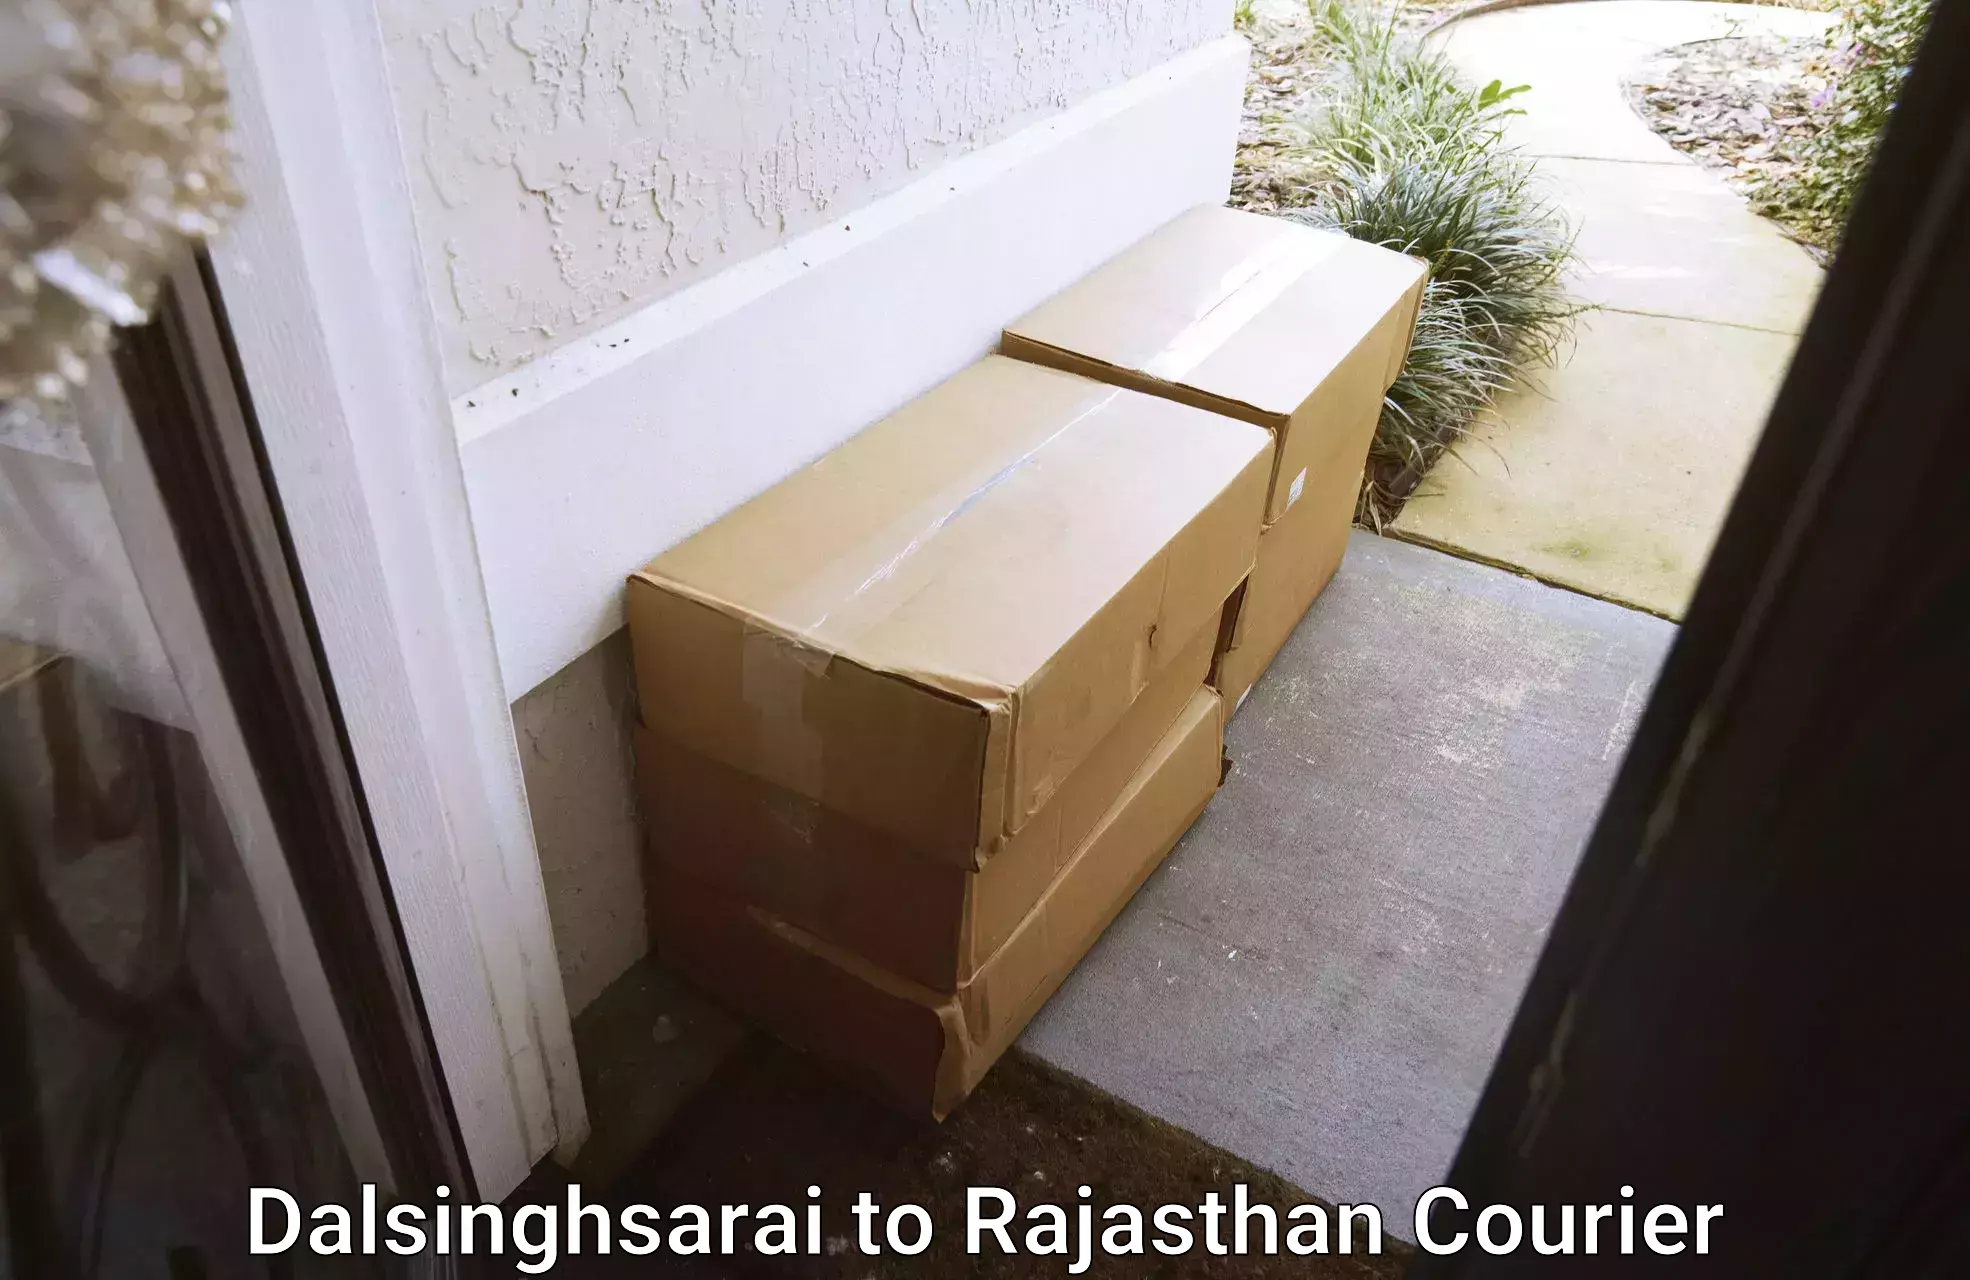 Full-service movers Dalsinghsarai to Khairthal